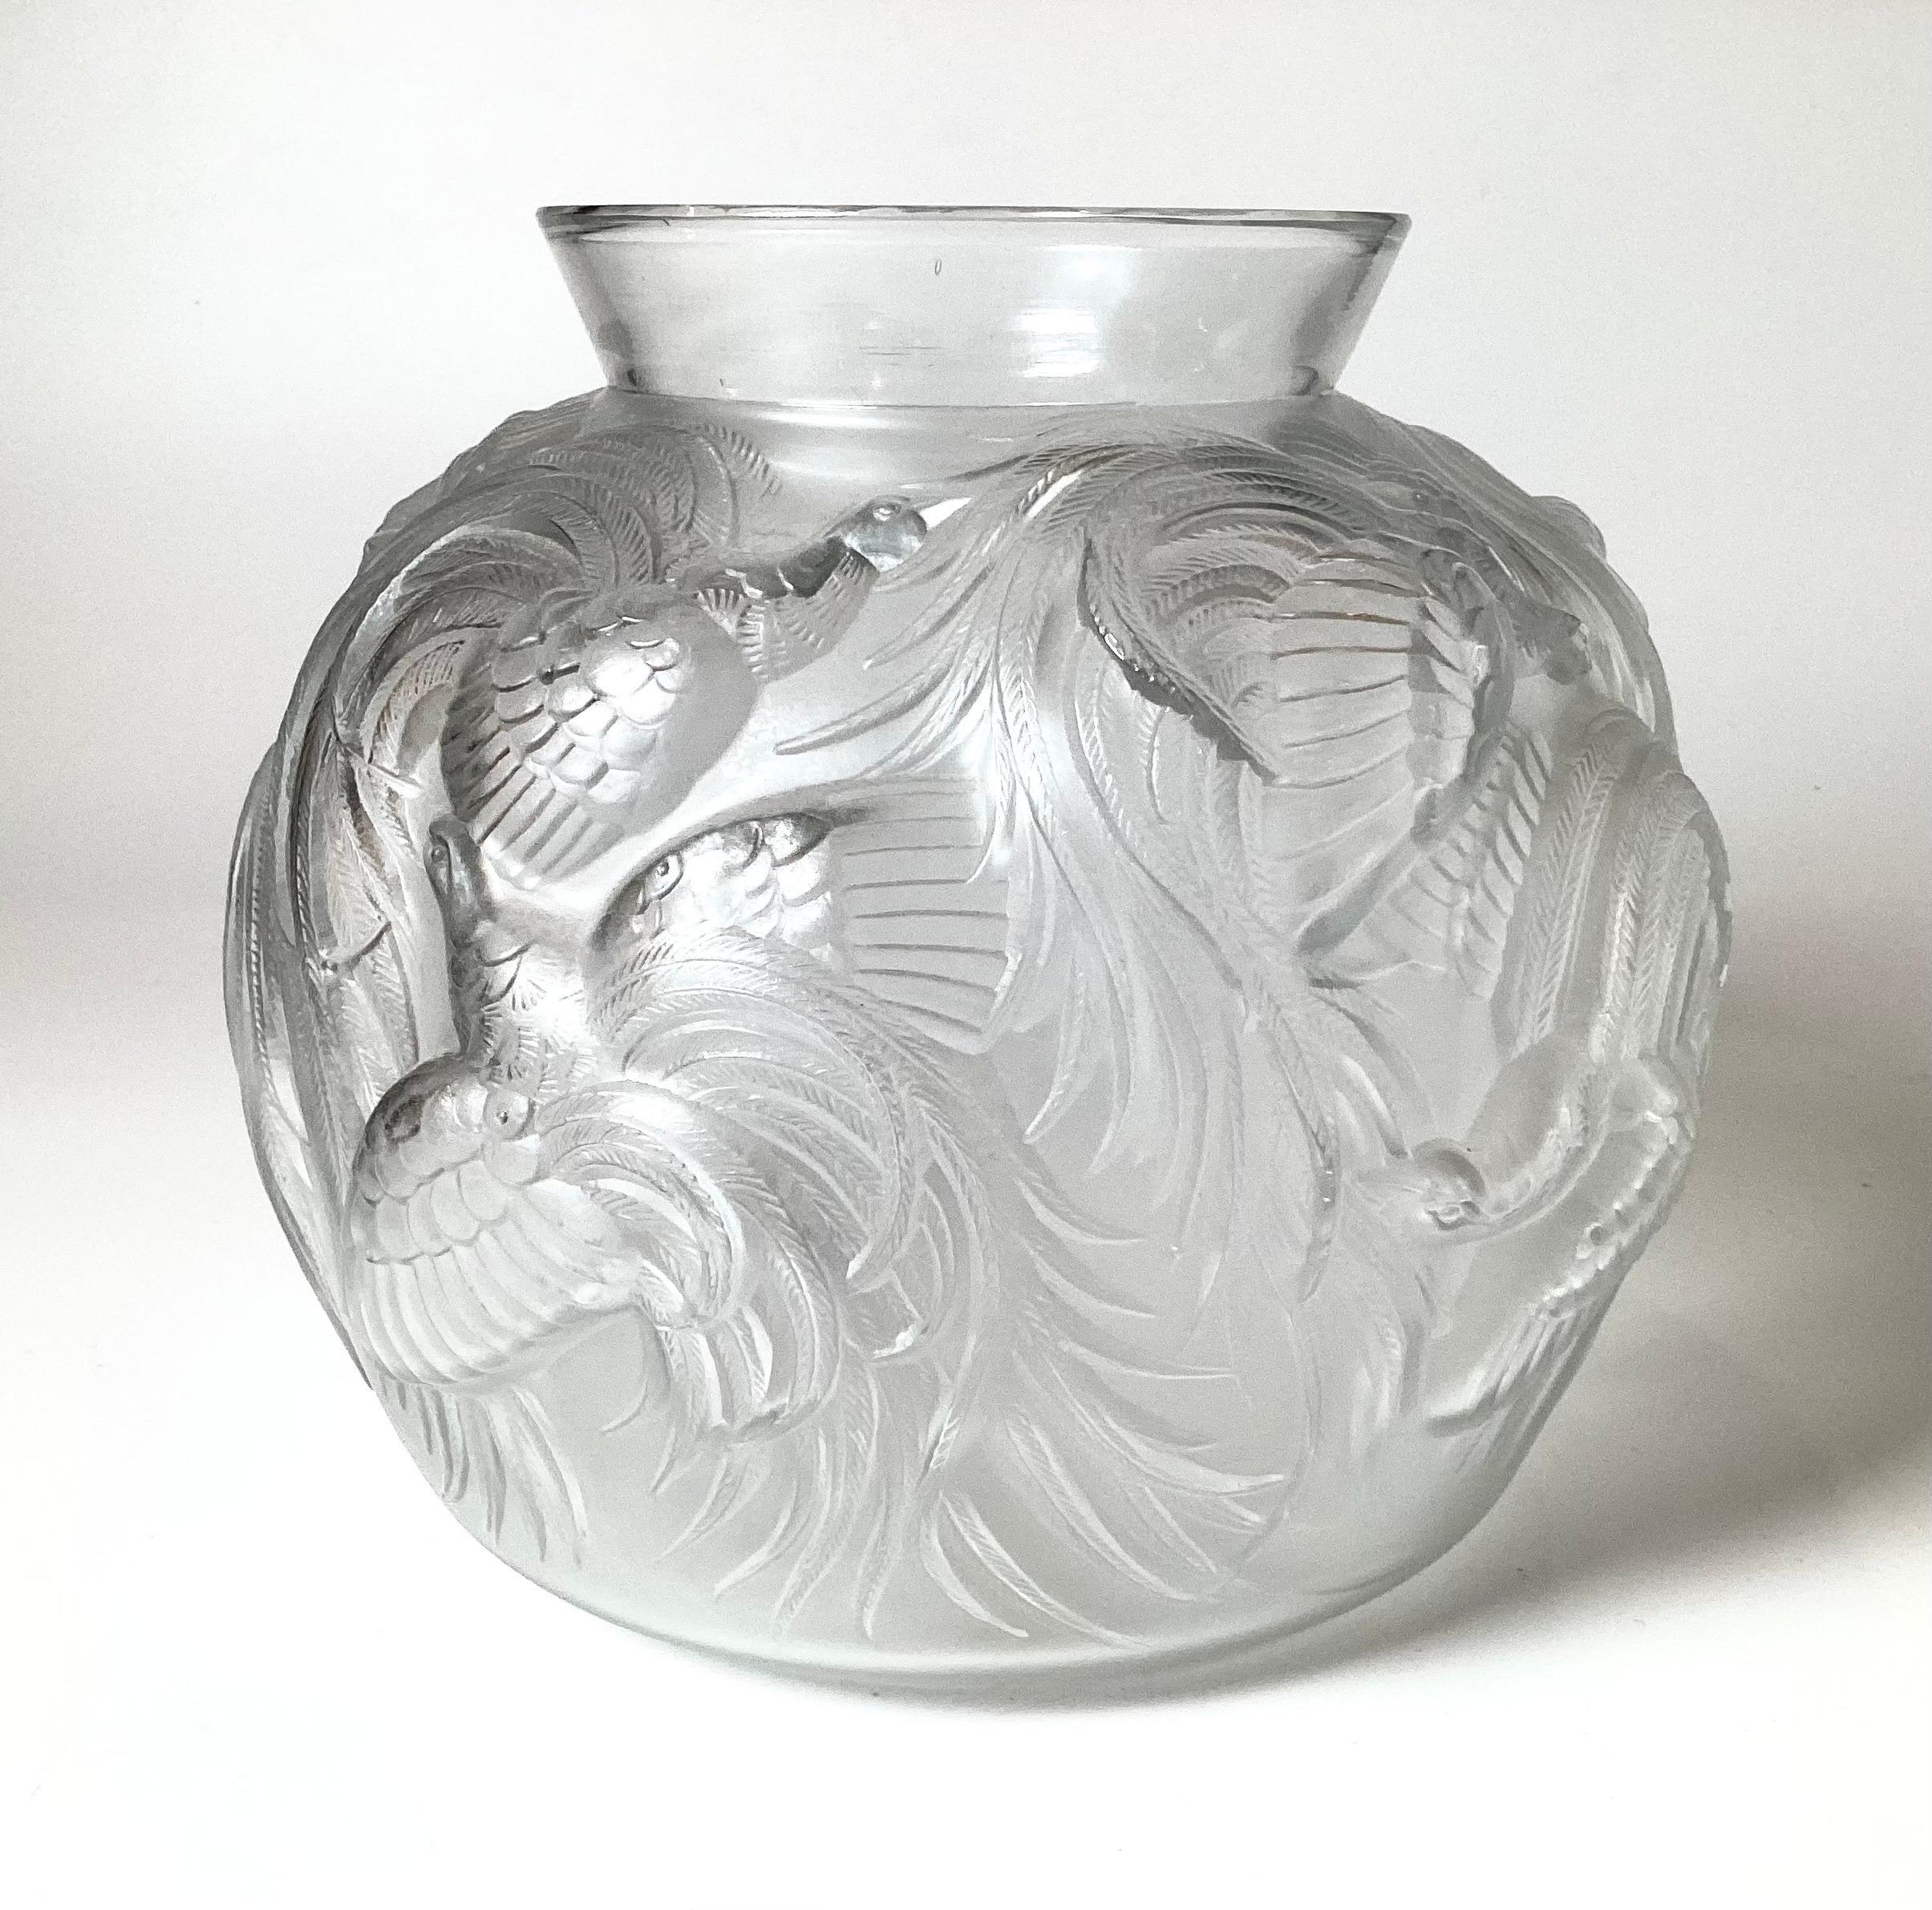 Elegant art glass vase with birds of paradise by Sabino of France, an early production piece, signed on the base. The bulbous vase with graceful decoration all over with a Lalique type frosted surface.